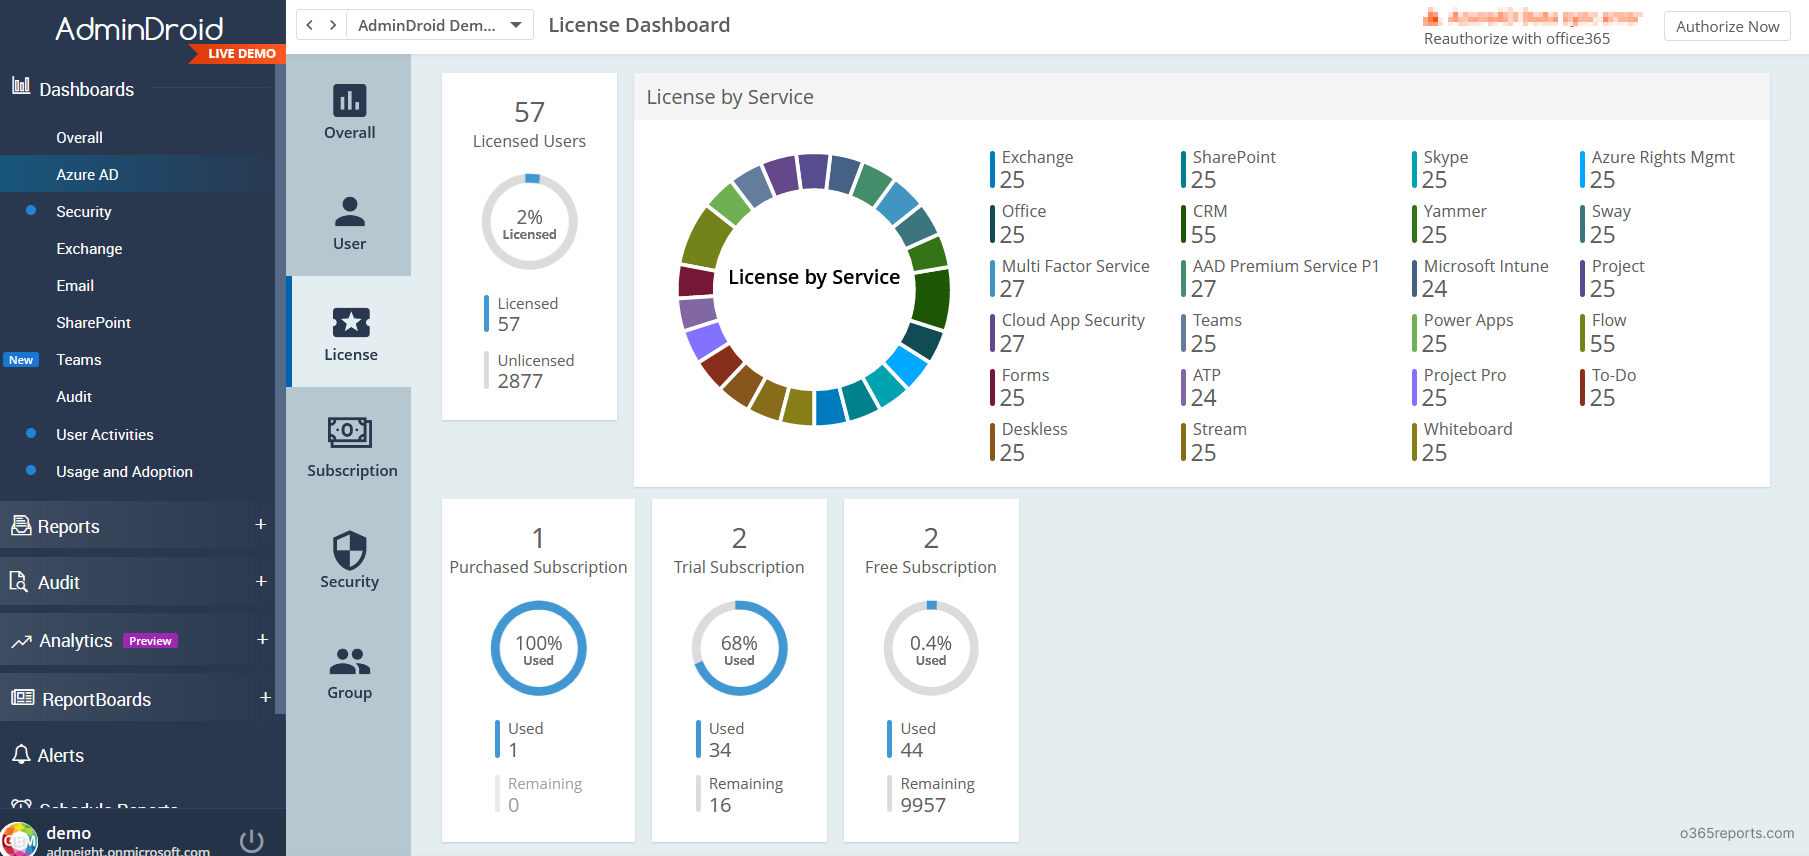 Office 365 license dashboard by AdminDroid